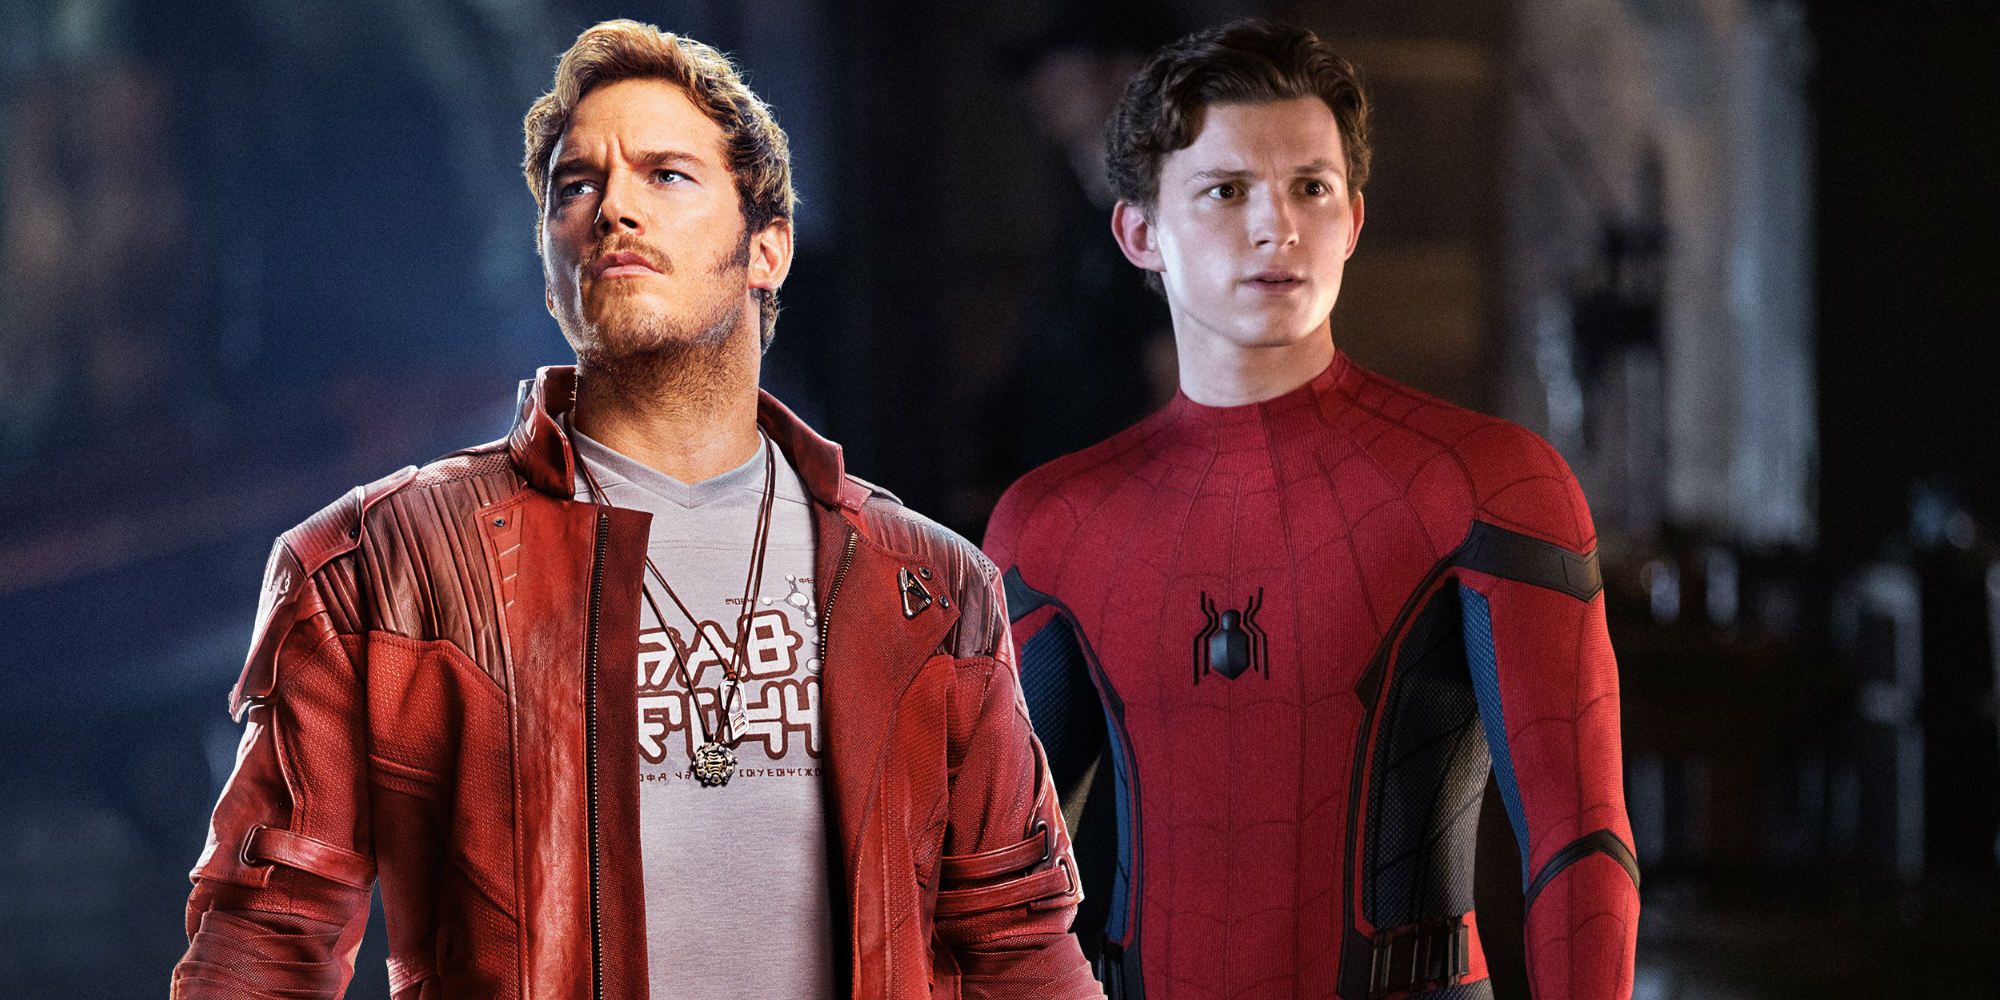 Chris Pratt As Star-Lord and Tom Holland As Spider-Man In MCU